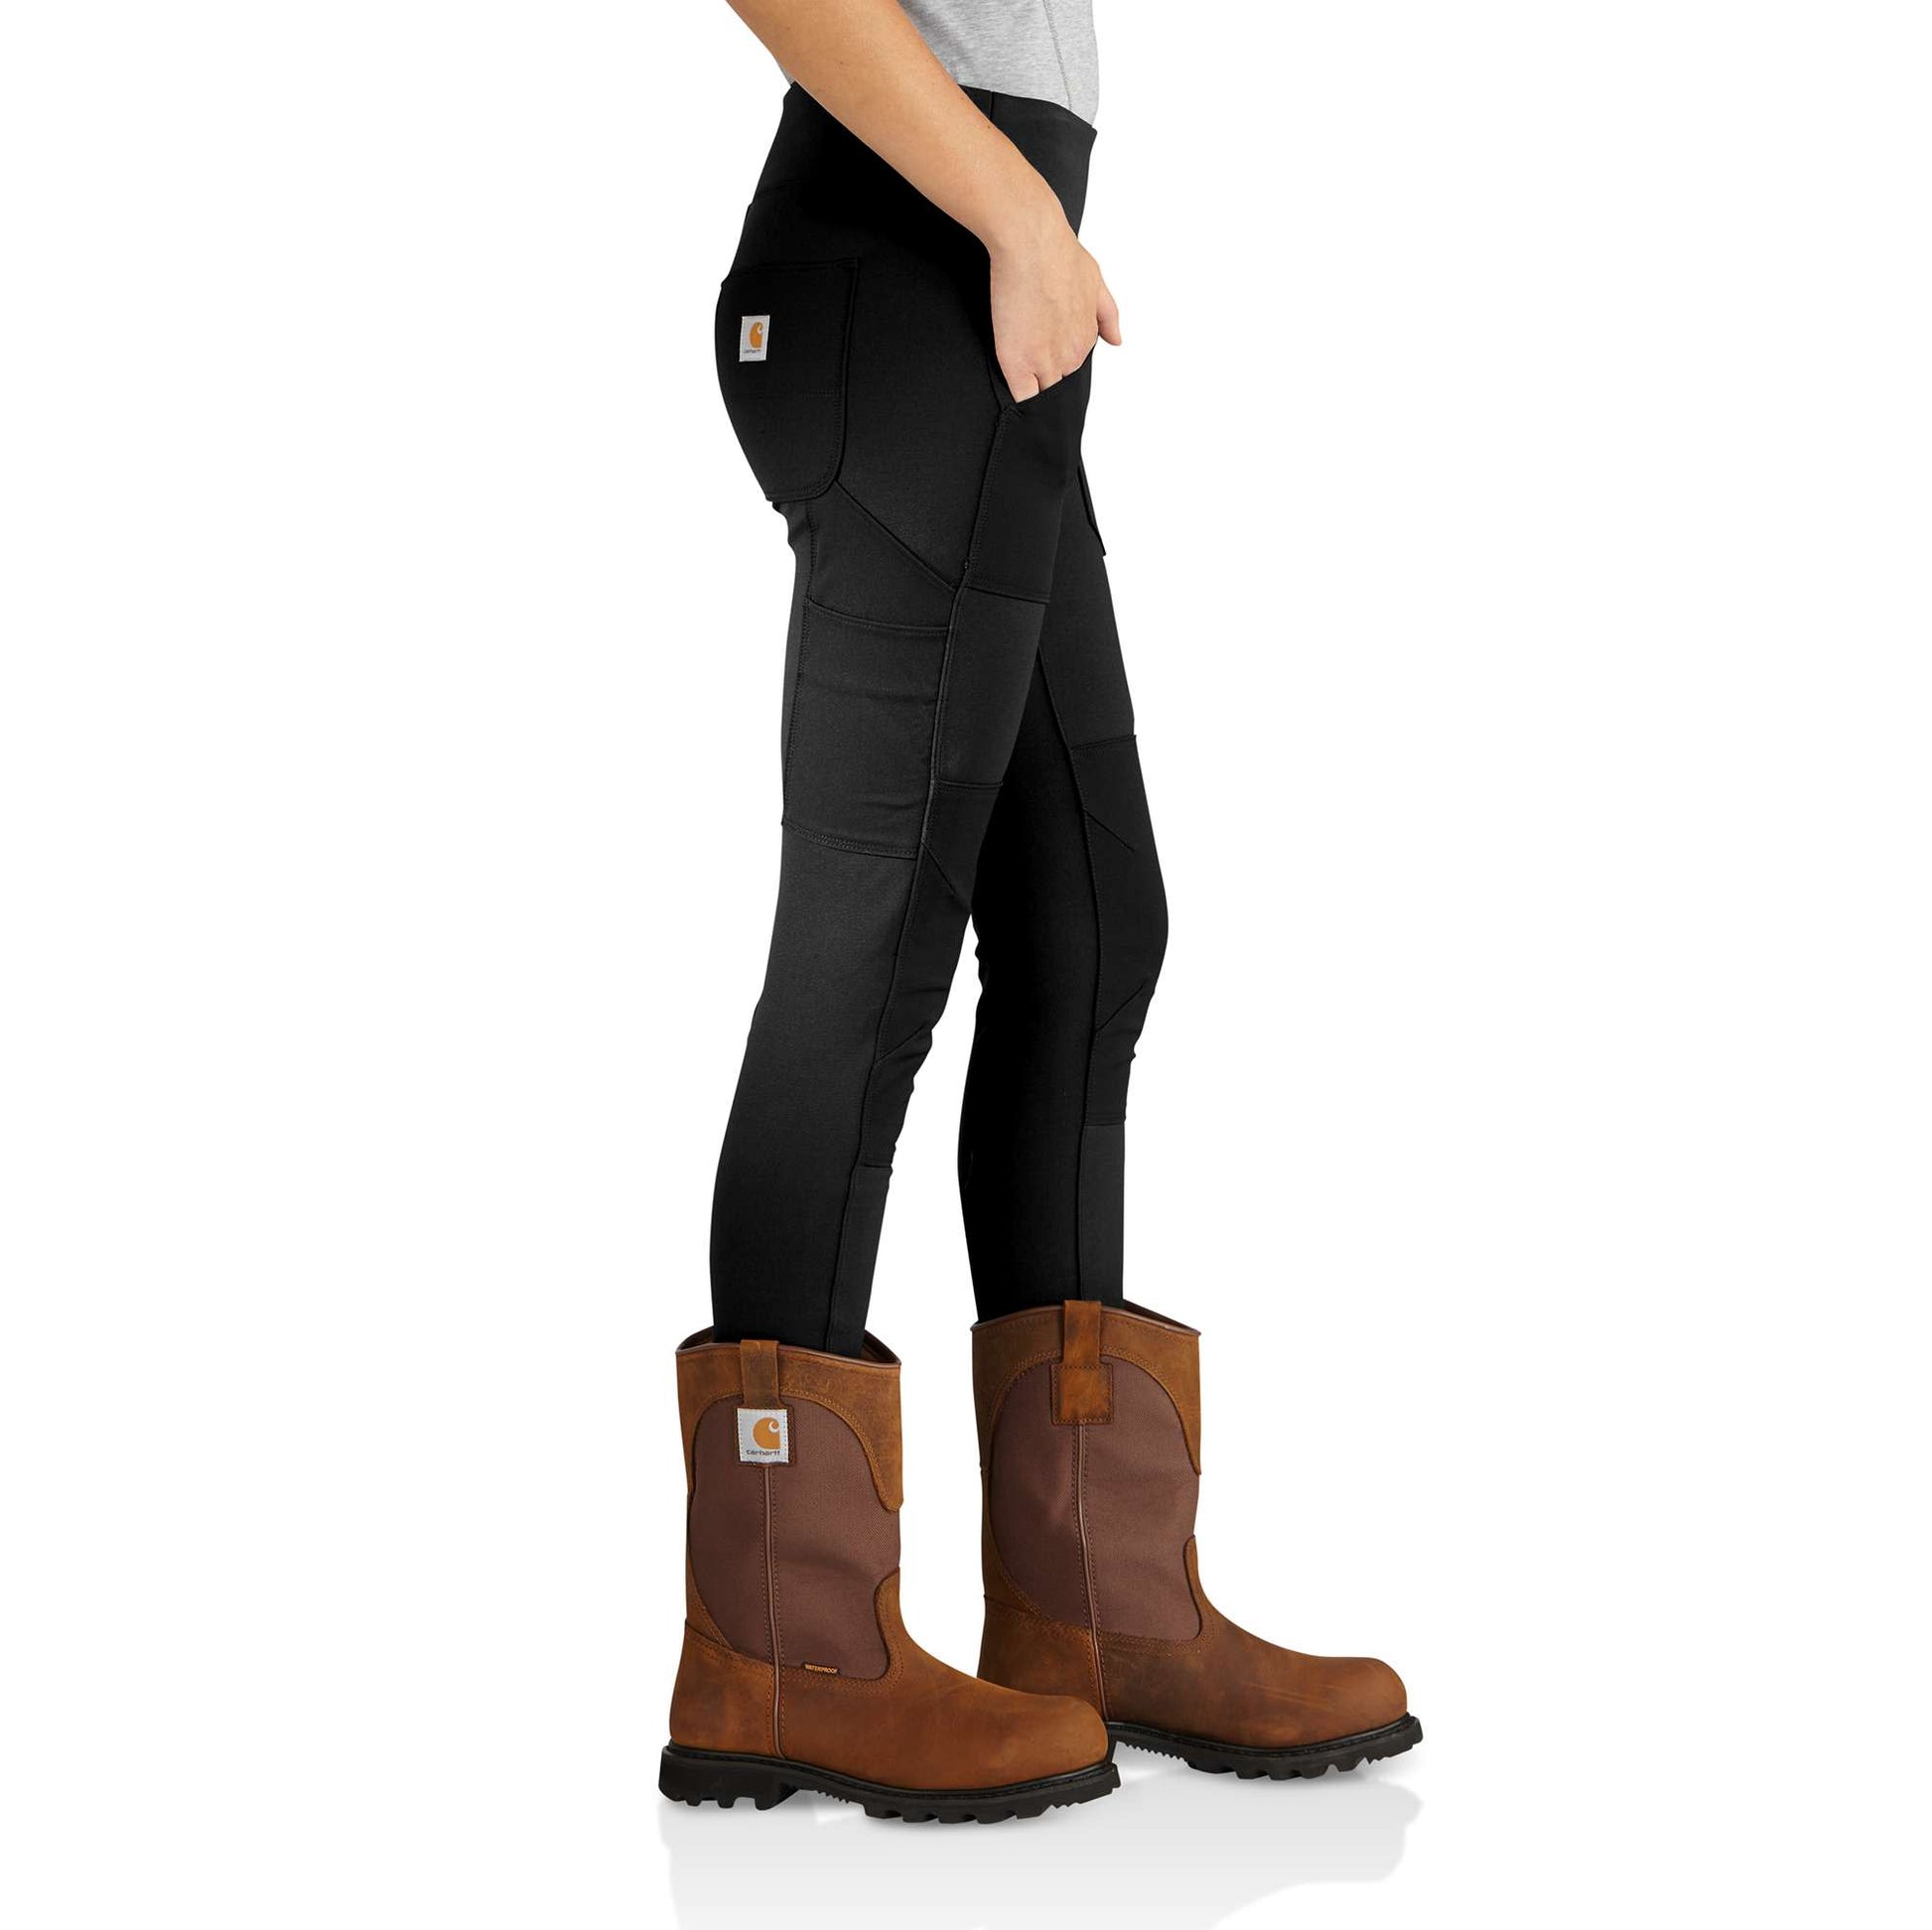 Carhartt Womens Force Fitted Midweight Utility Legging